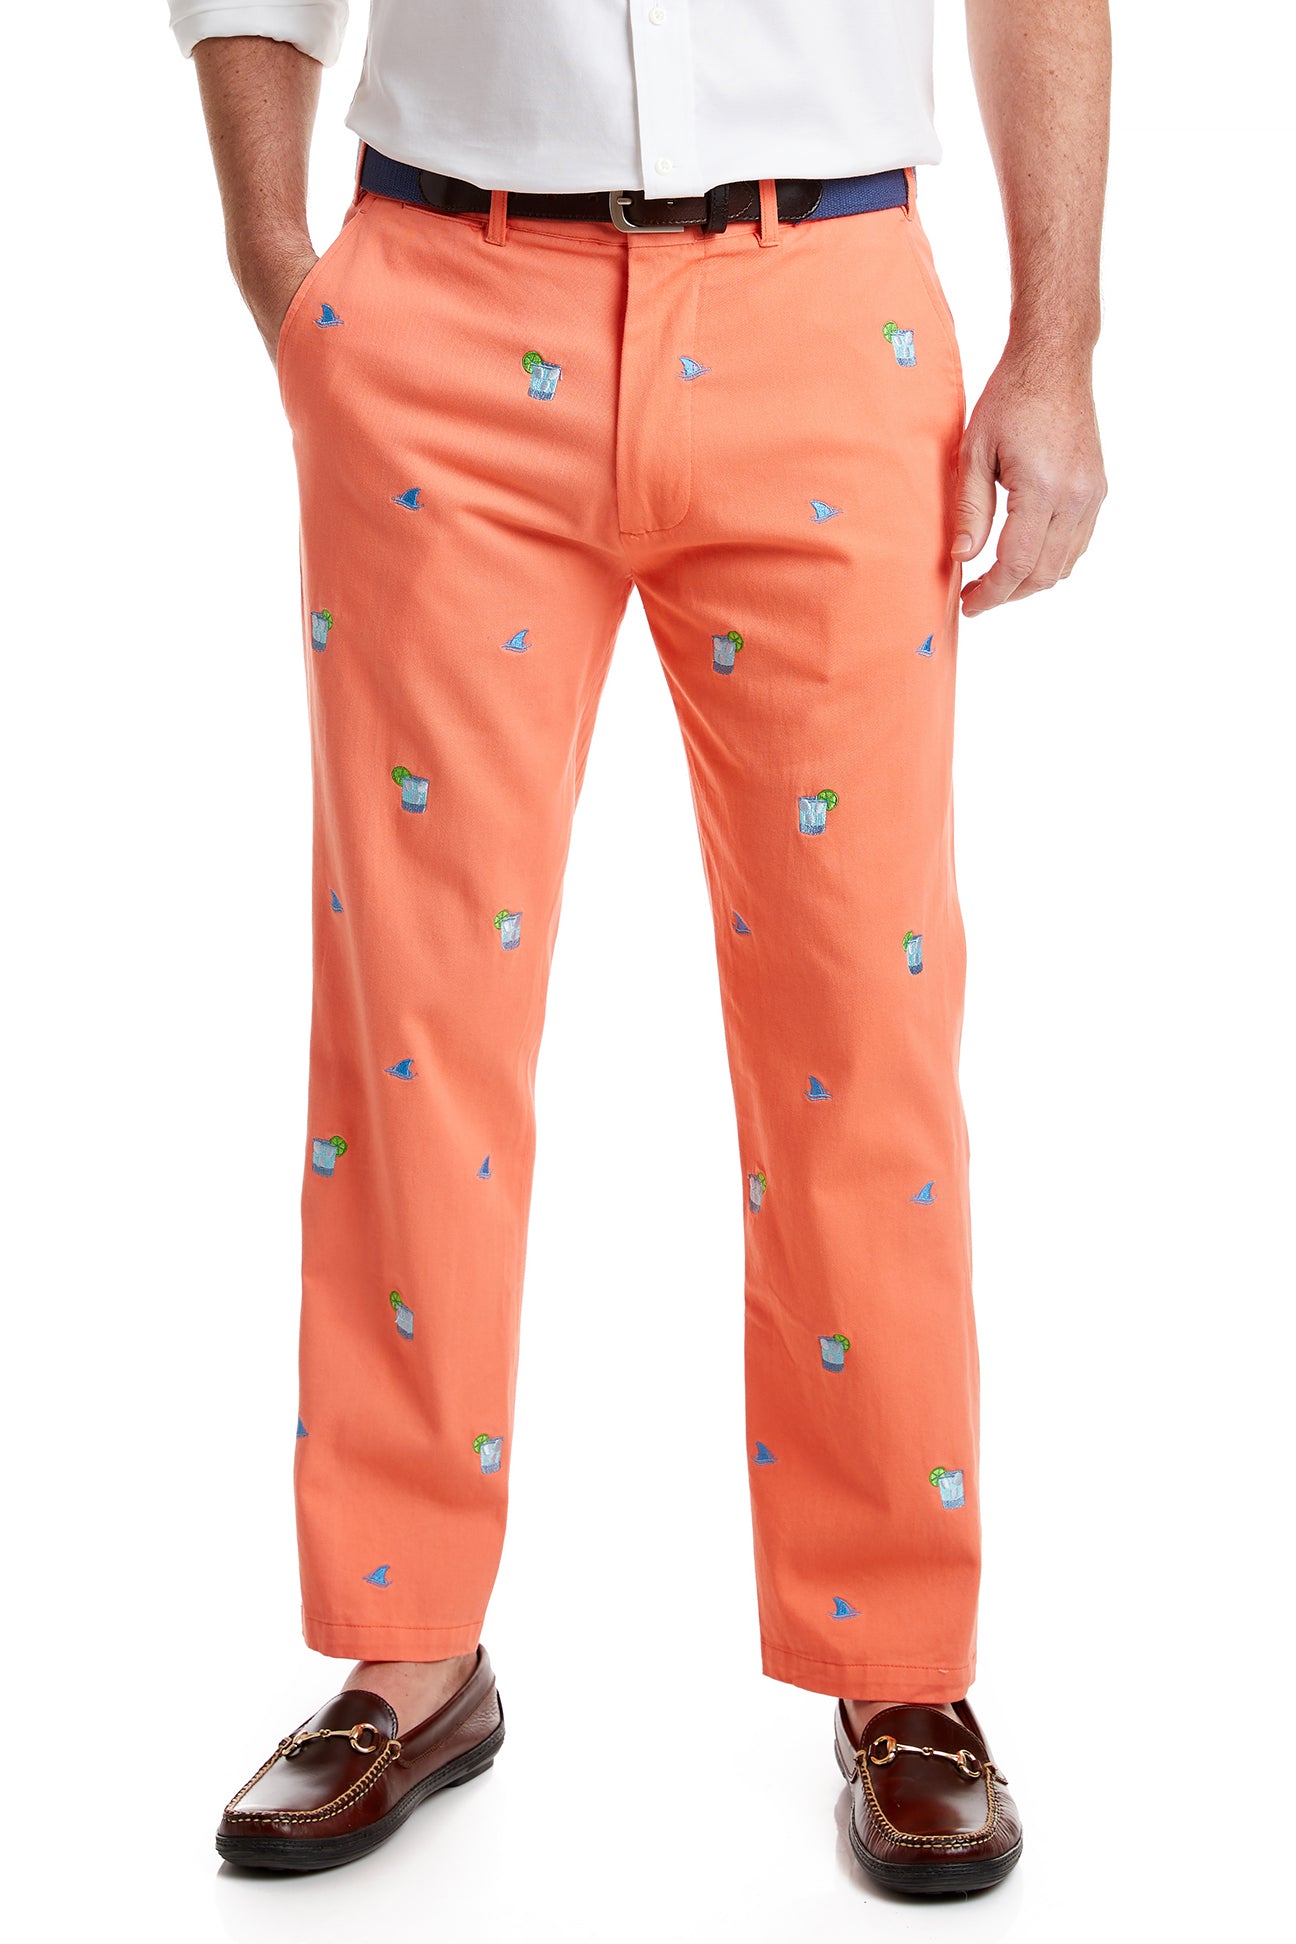 Harbor Pant Stretch Twill Coral with Fin & Tonic MENS EMBROIDERED PANTS Castaway Nantucket Island